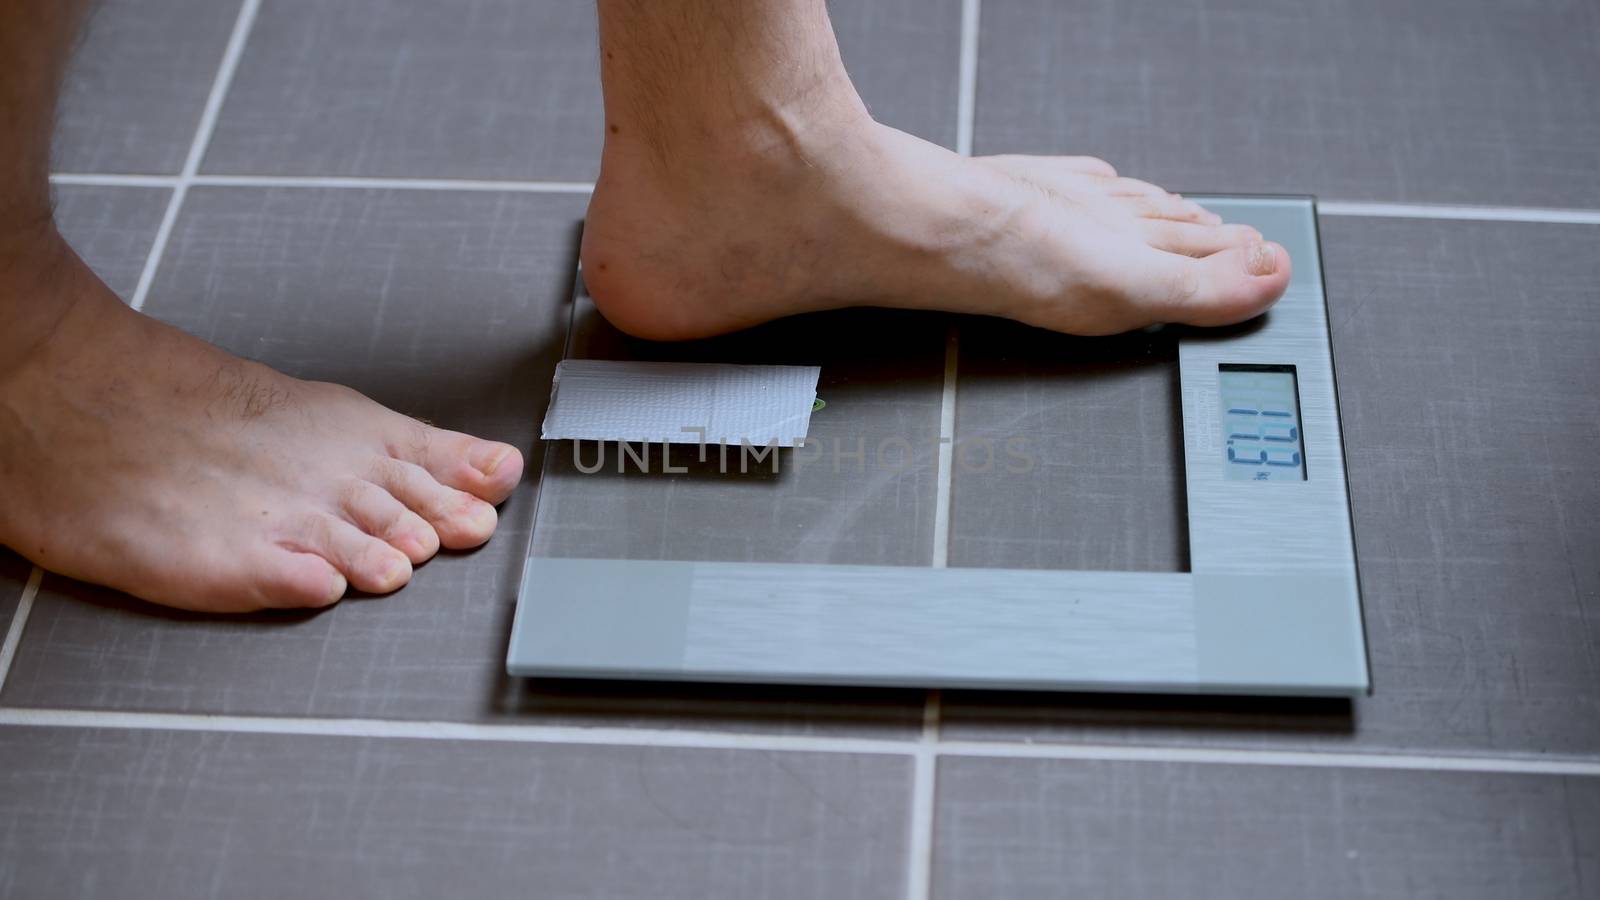 Male feet on glass scales, men's diet, body weight by asafaric